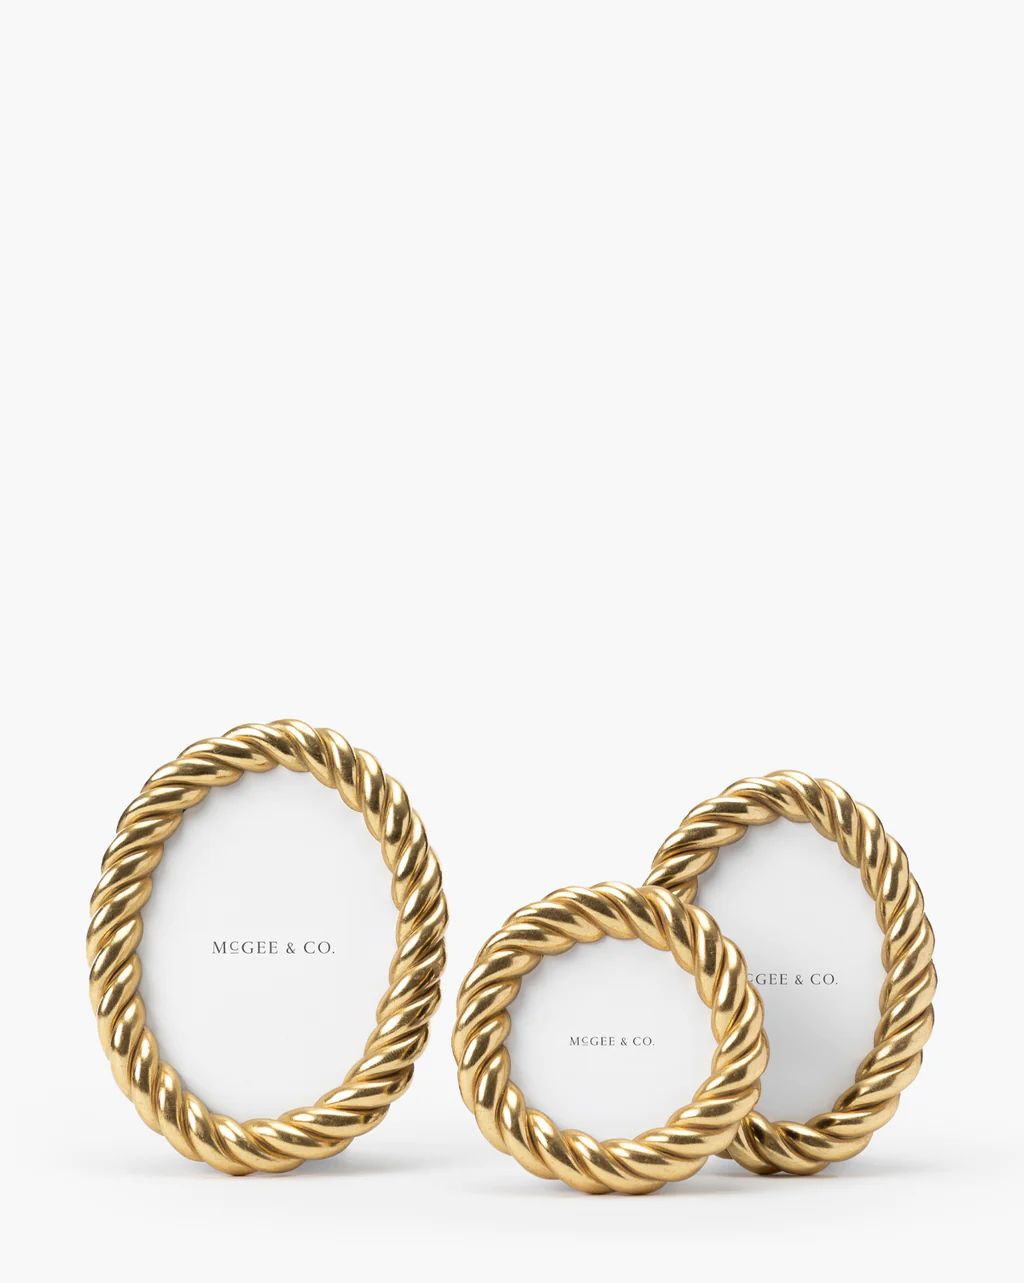 Gilded Rope Frame | McGee & Co.